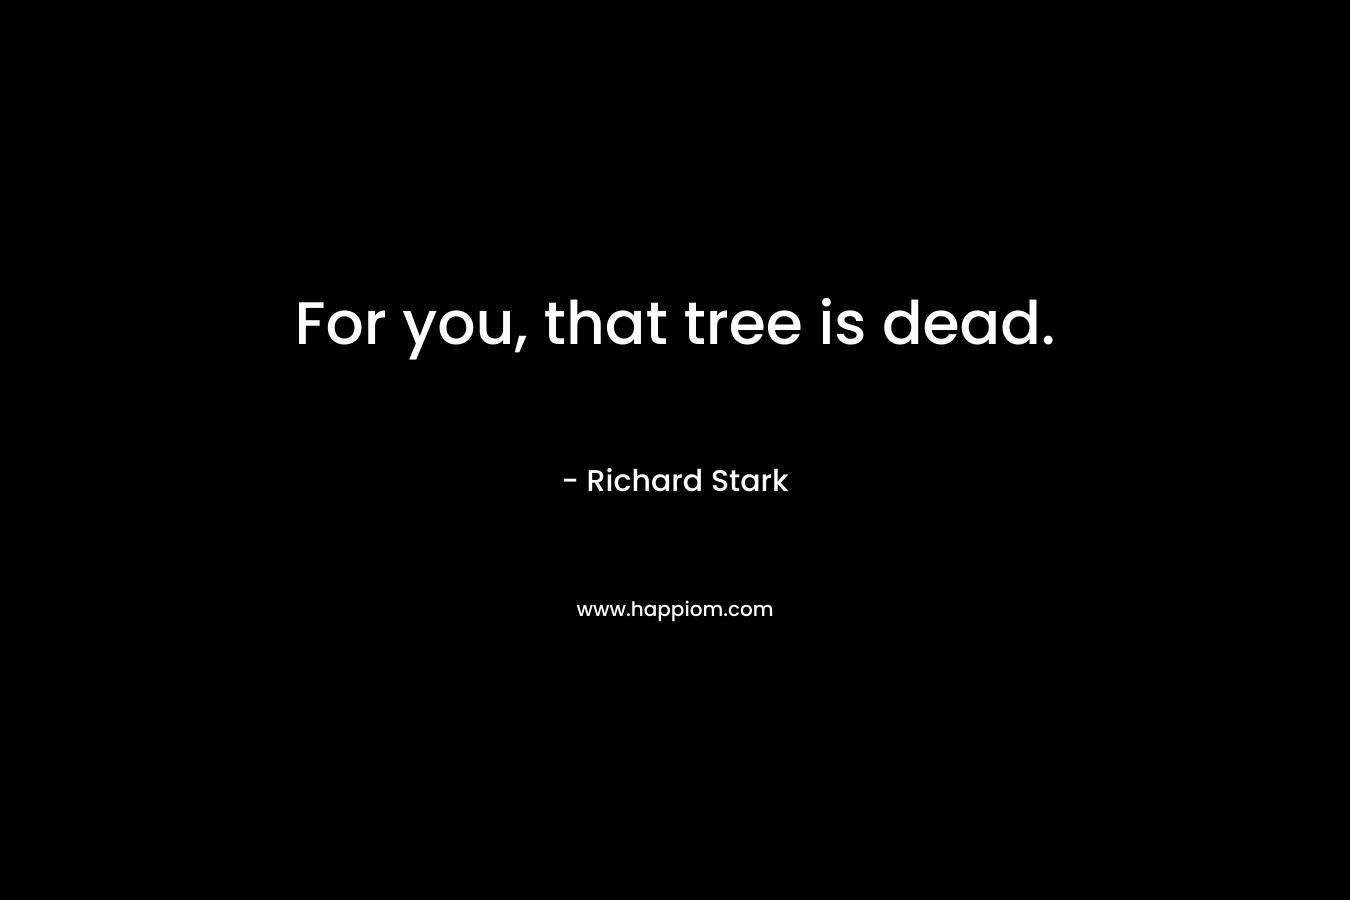 For you, that tree is dead.